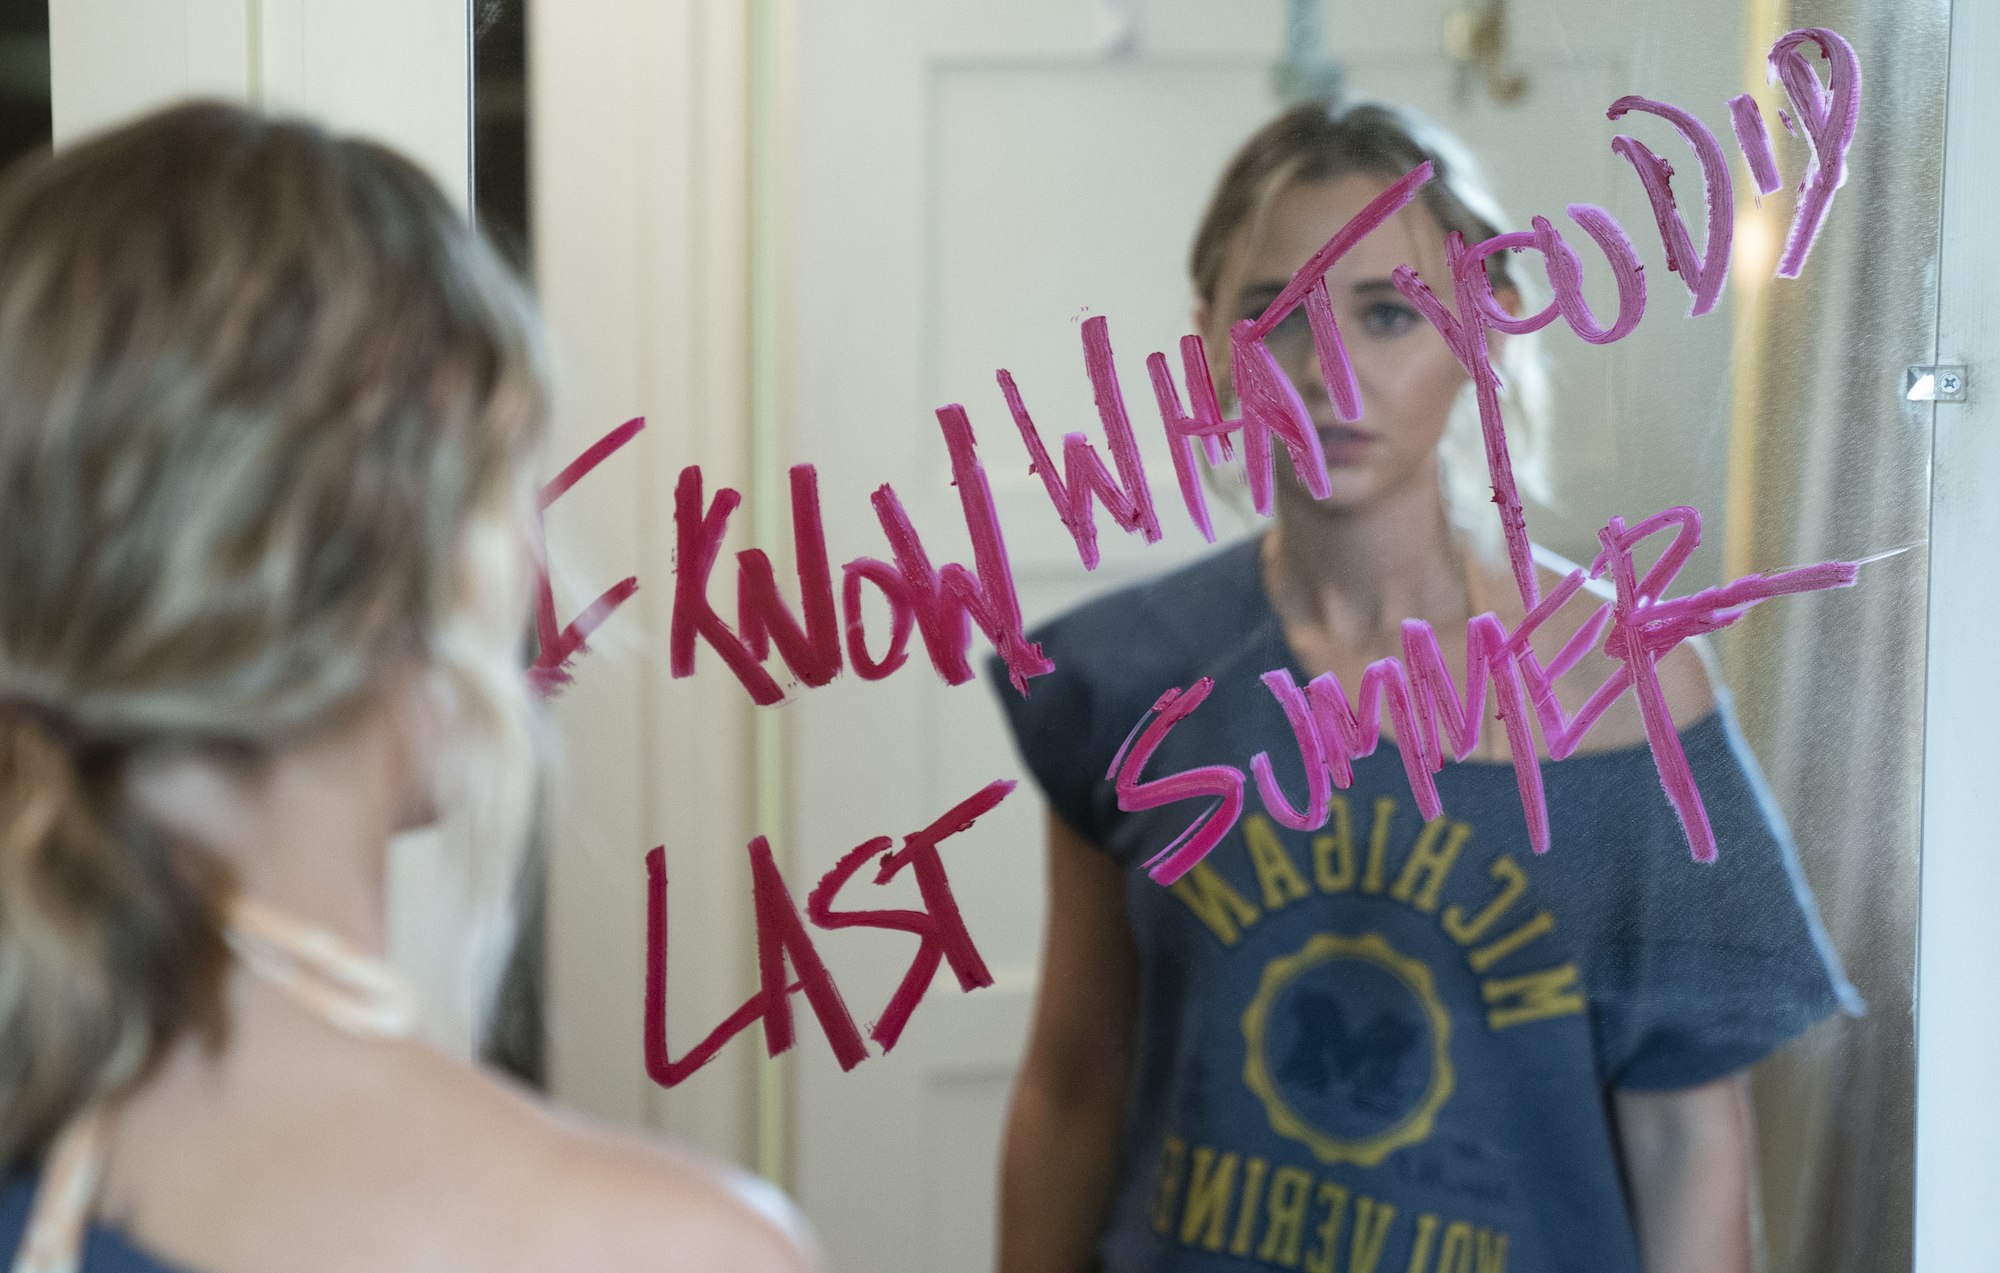 Madison Iseman standing in front of a mirror with lipstick on it in 'I Know What You Did Last Summer' Amazon Prime series.